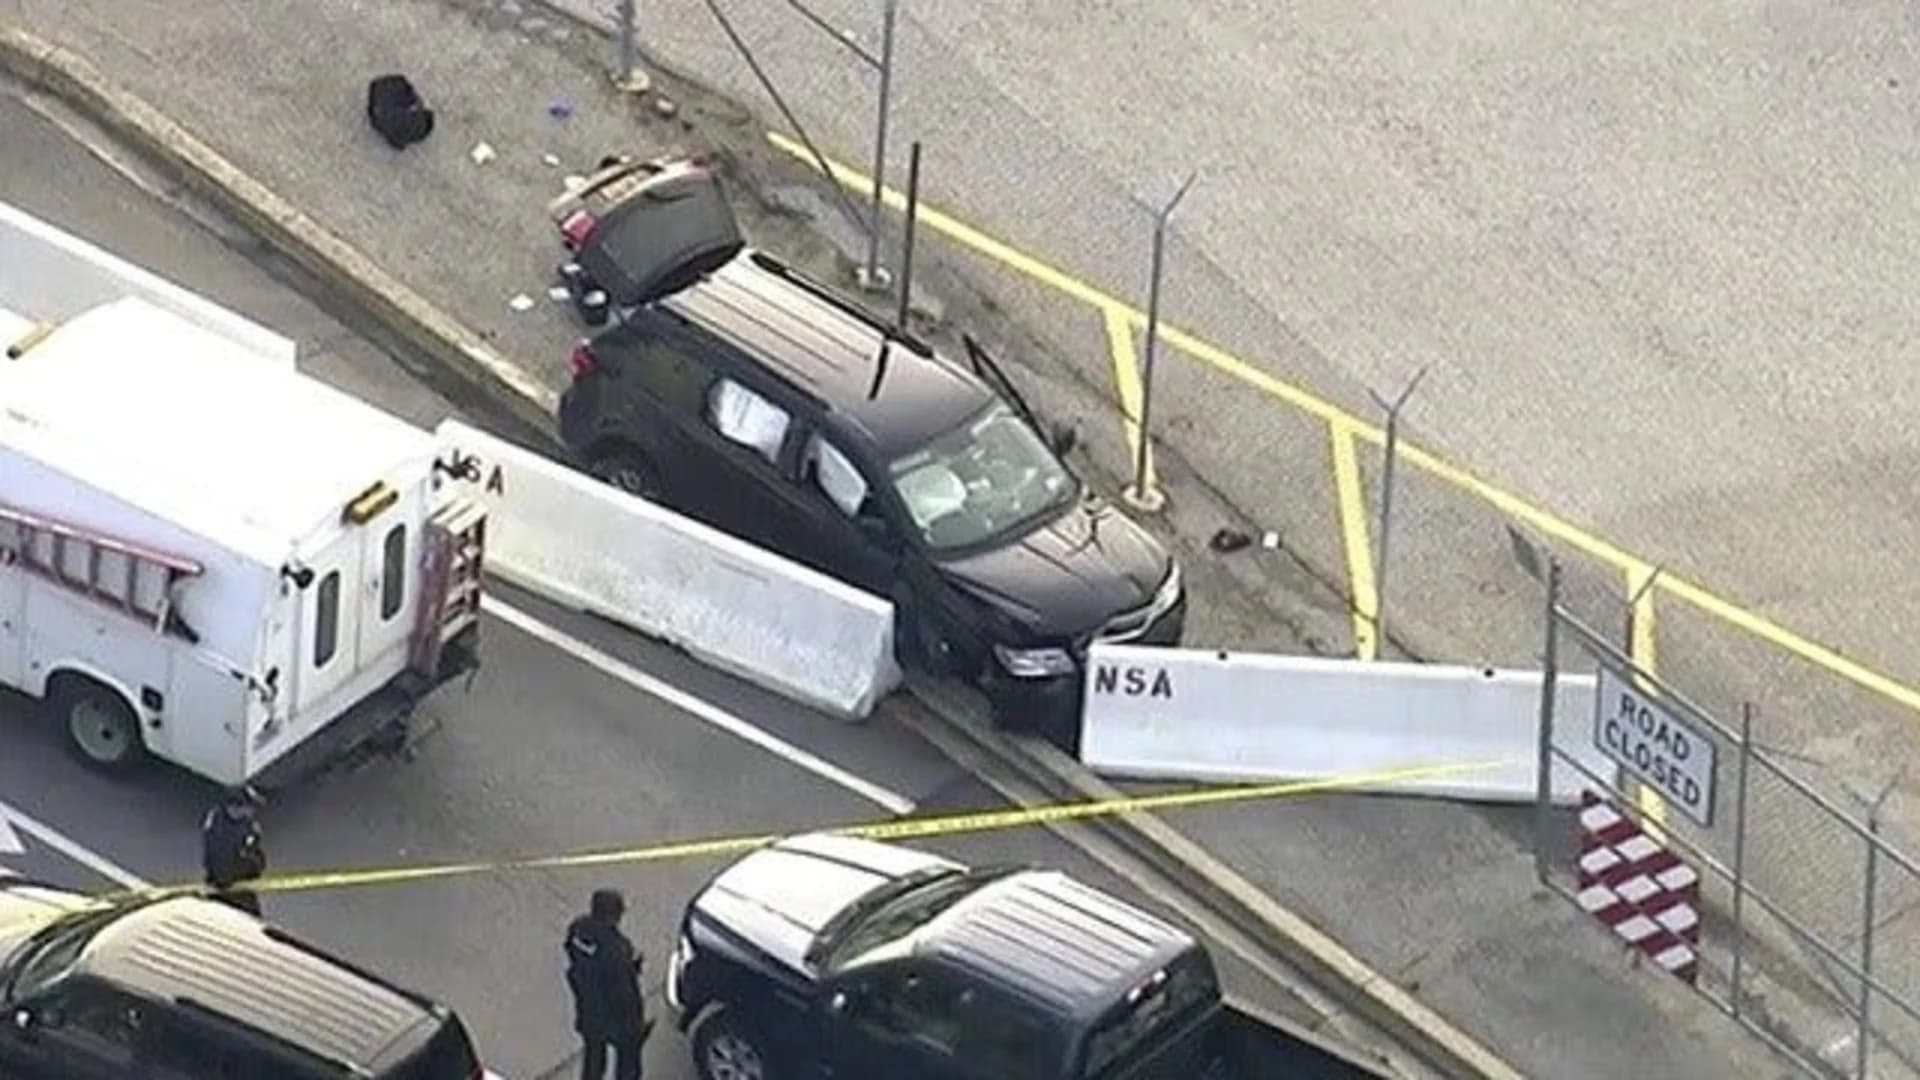 Shots fired: FBI probing why SUV tried to enter NSA campus